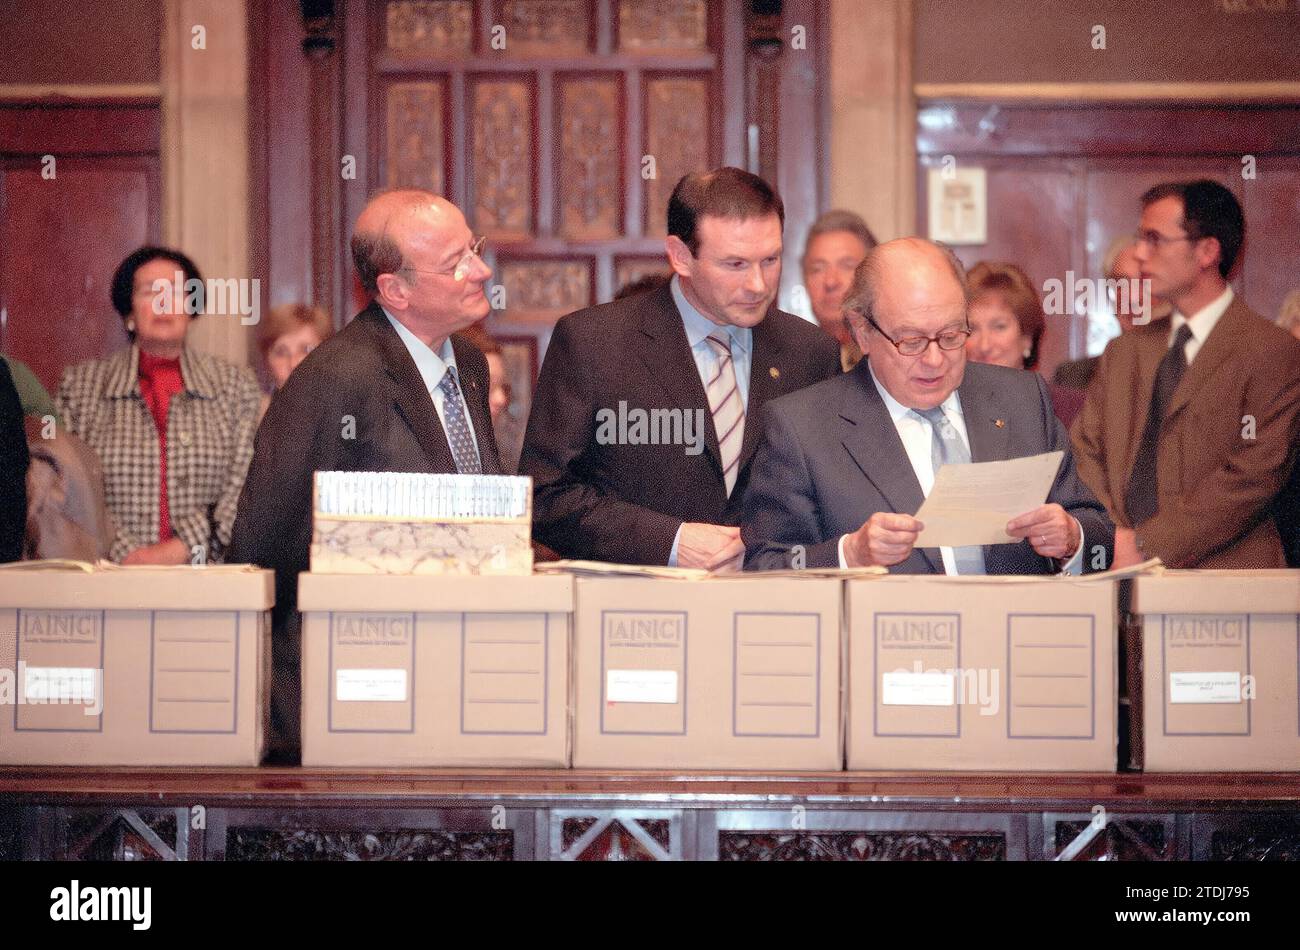 02/11/2002. Barcelona, 02/12/02.............Delivery by Ibarretxe of the Documents from the Historical Archive of the Generalita Republic by the Basque government To the Catalan government, in the image They look at an Ibarretxe document and Pujol...........Photo Elena Carreras.......Archdc. Credit: Album / Archivo ABC / Elena Carreras Stock Photo